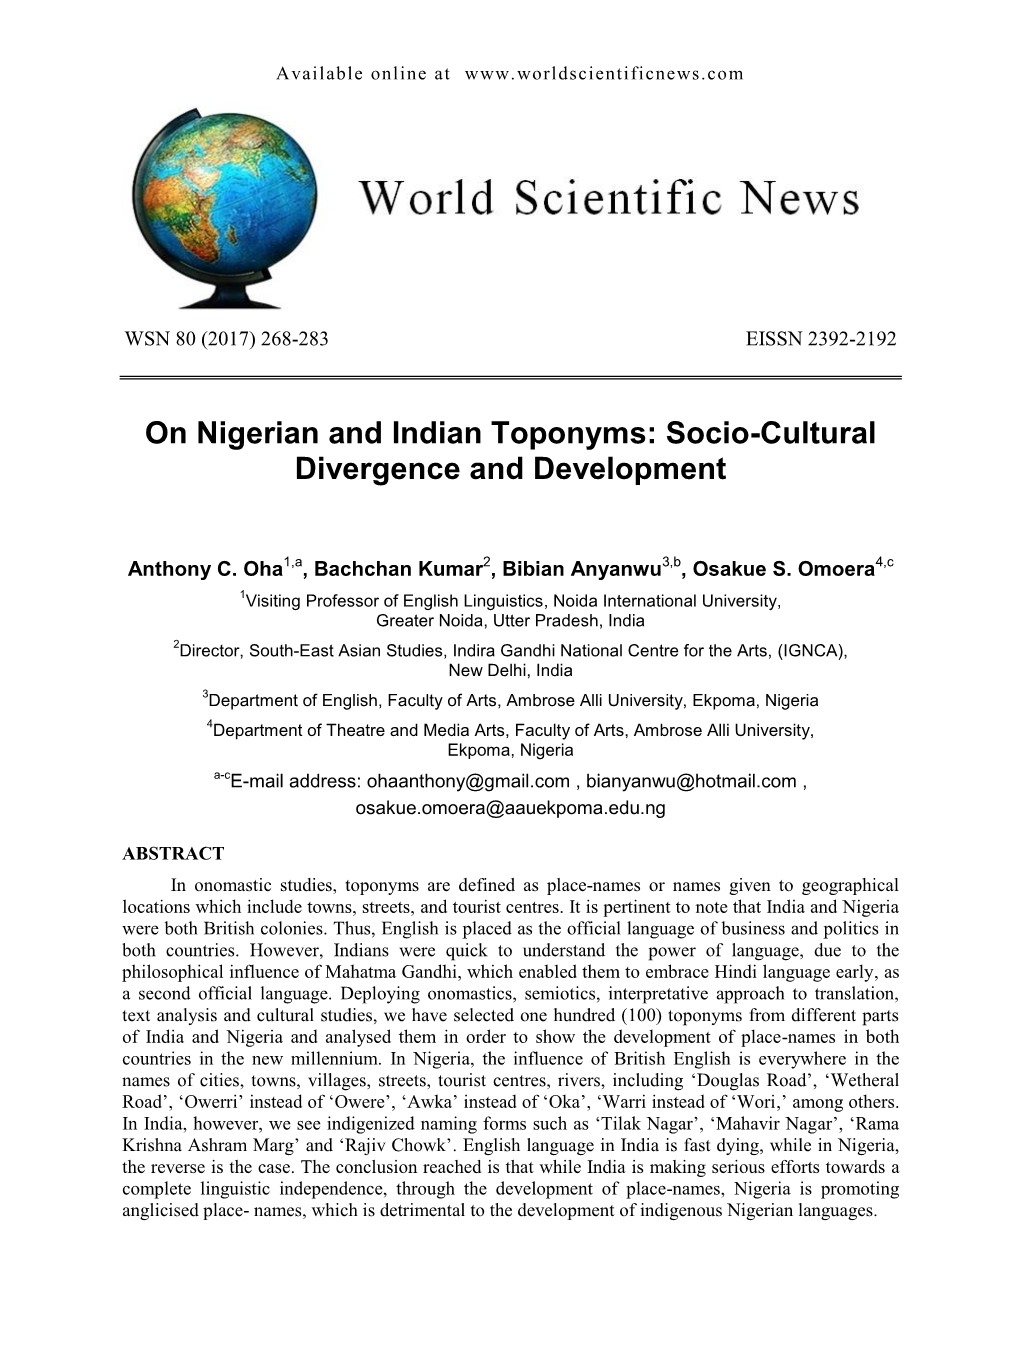 On Nigerian and Indian Toponyms: Socio-Cultural Divergence and Development